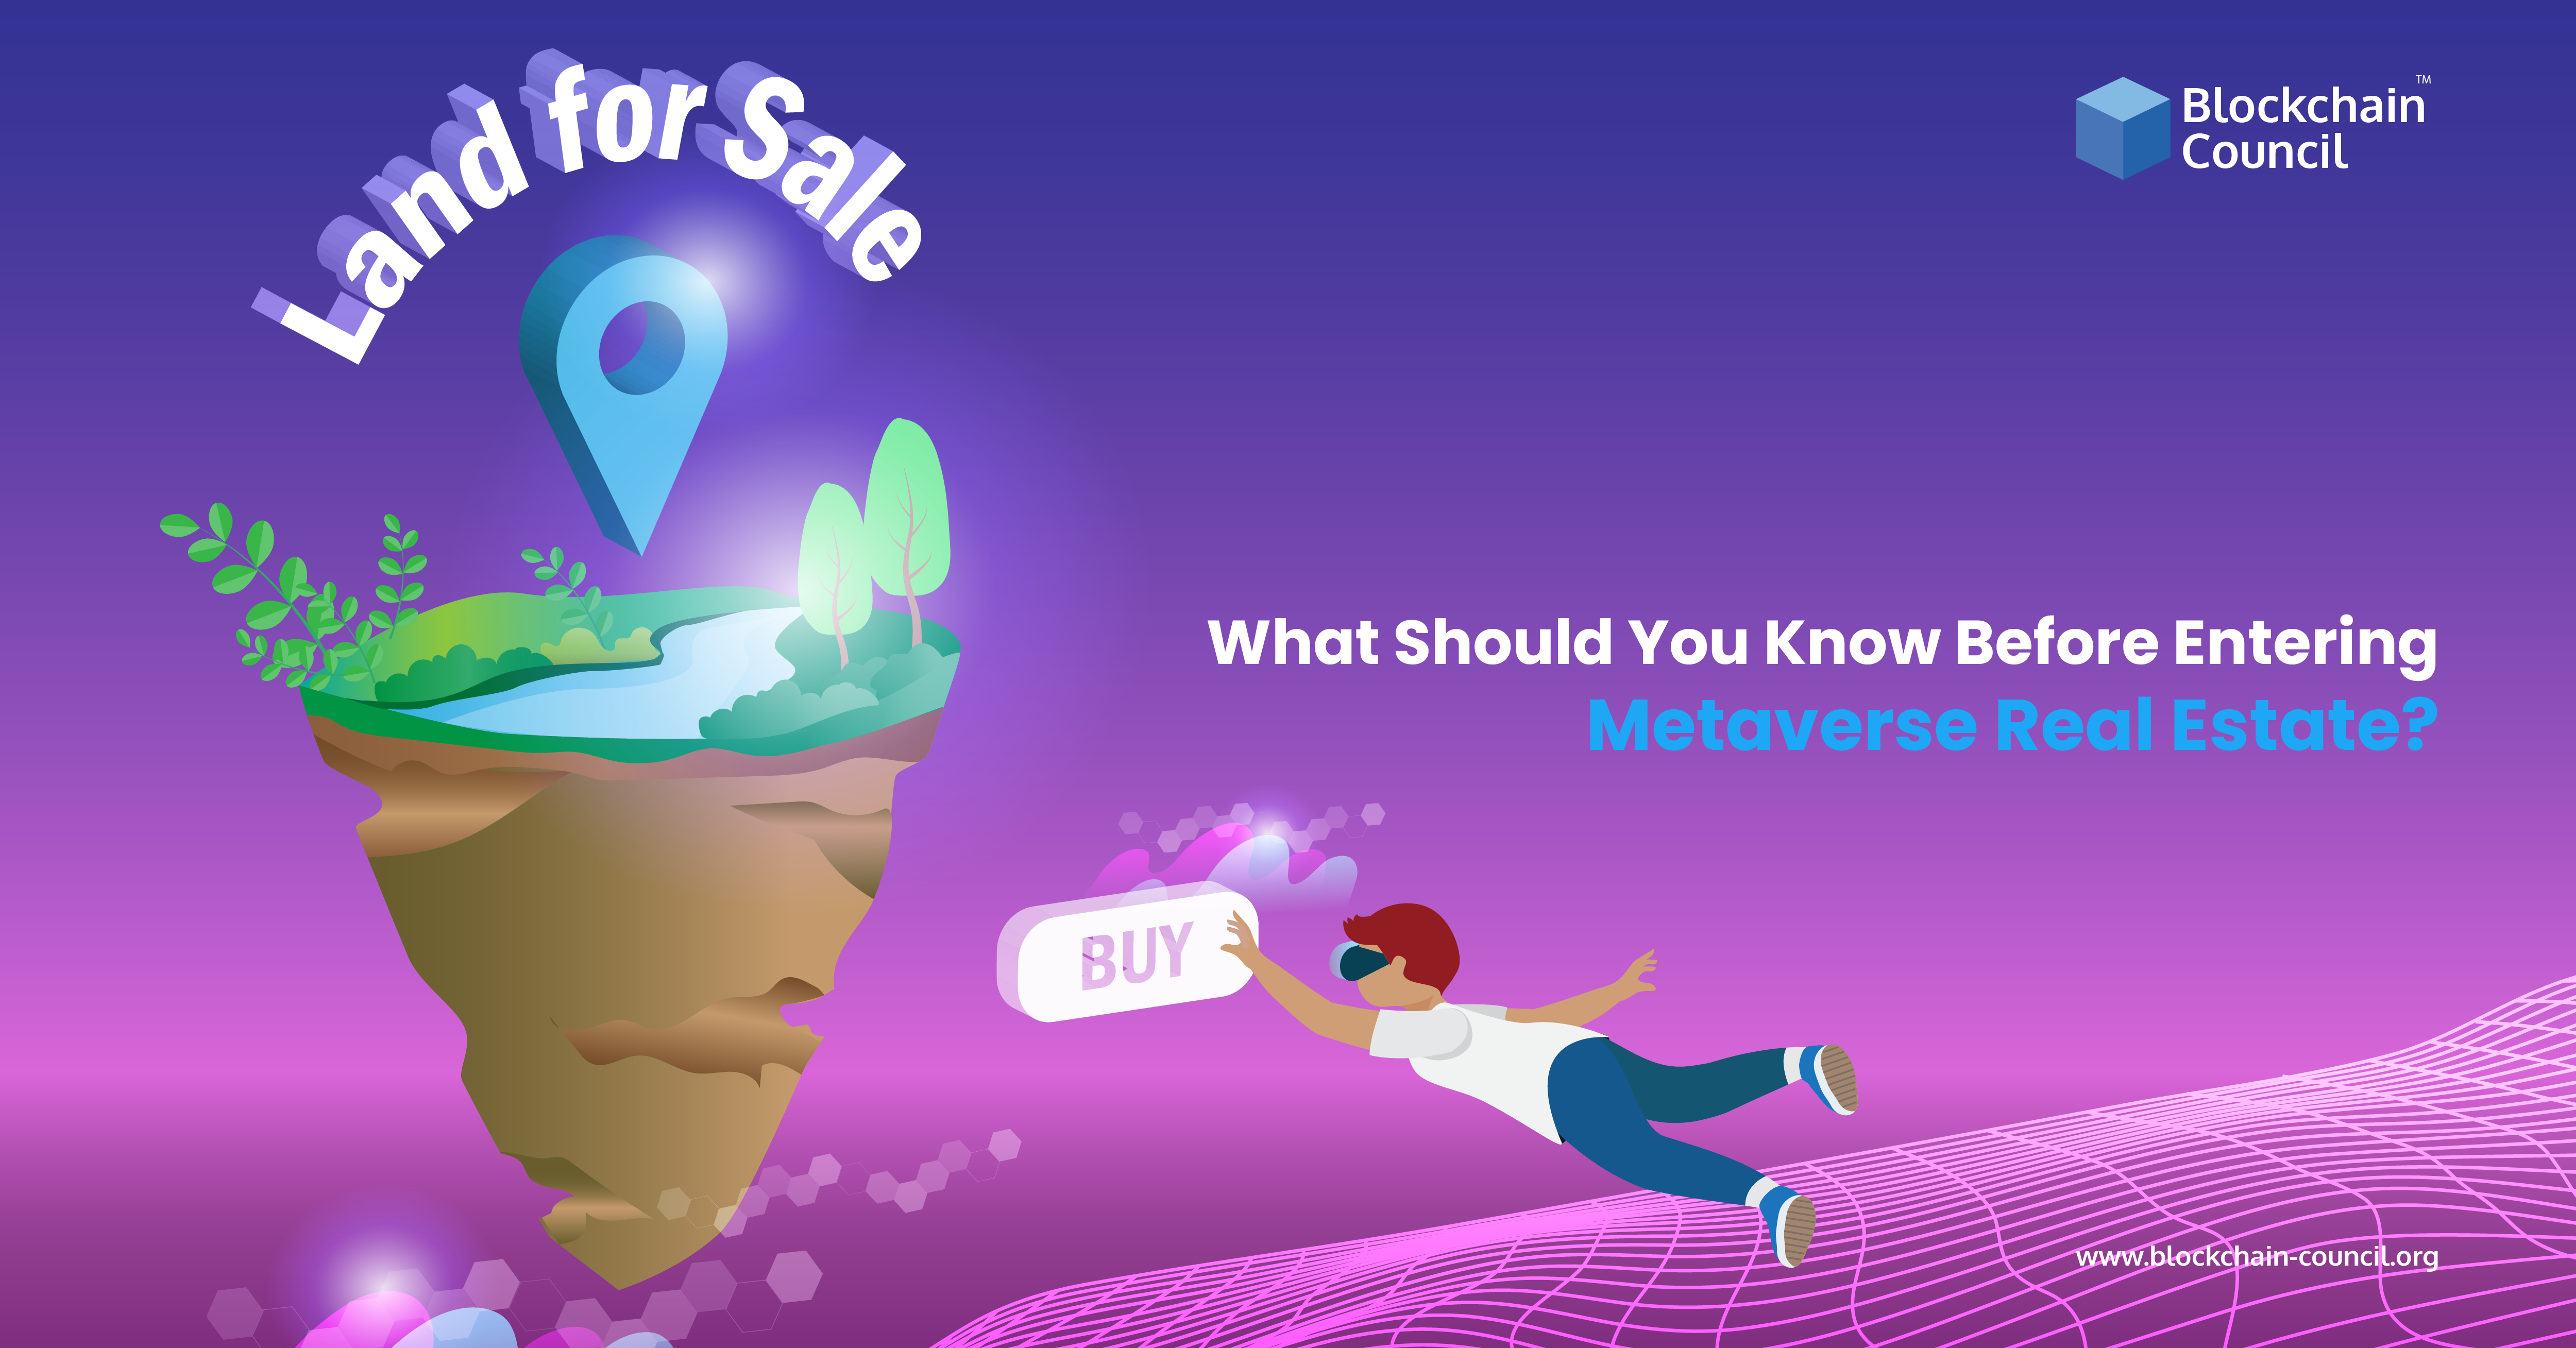 What Should You Know Before Entering Metaverse Real Estate?